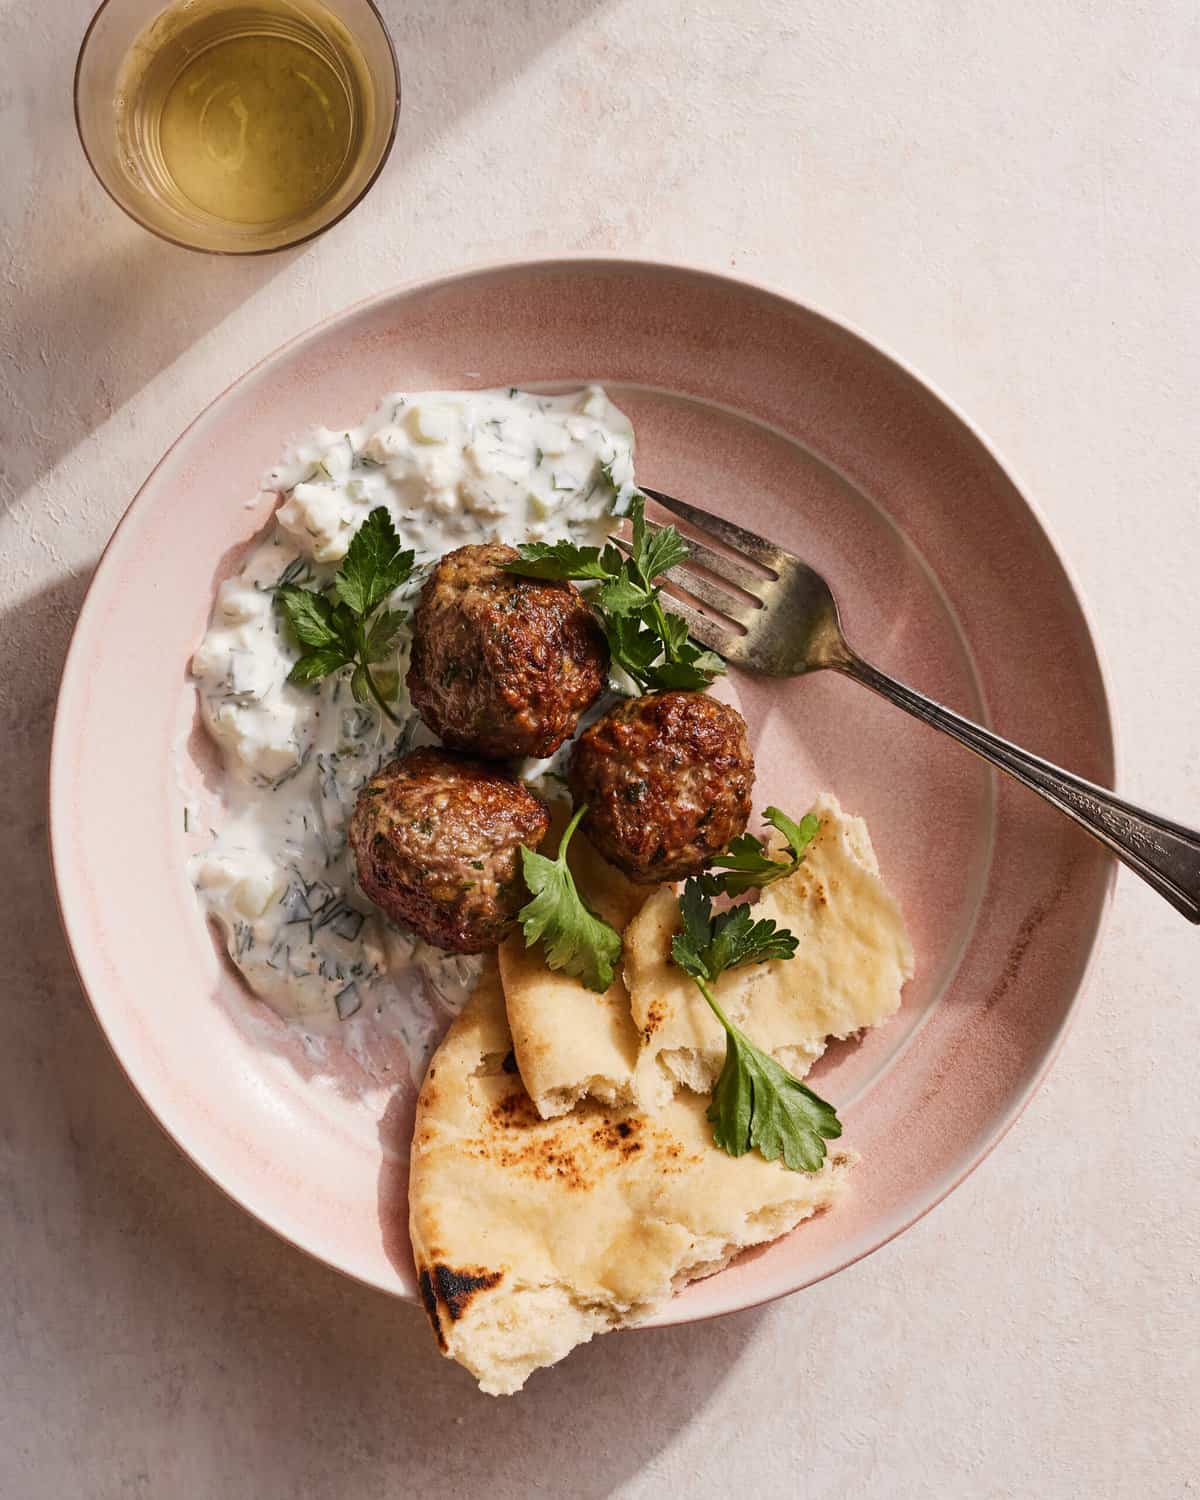 Greek lamb meatballs and tzatziki topped with fresh parsley and served with a side of naan in a pink ceramic bowl with a glass of white wine in the top left corner